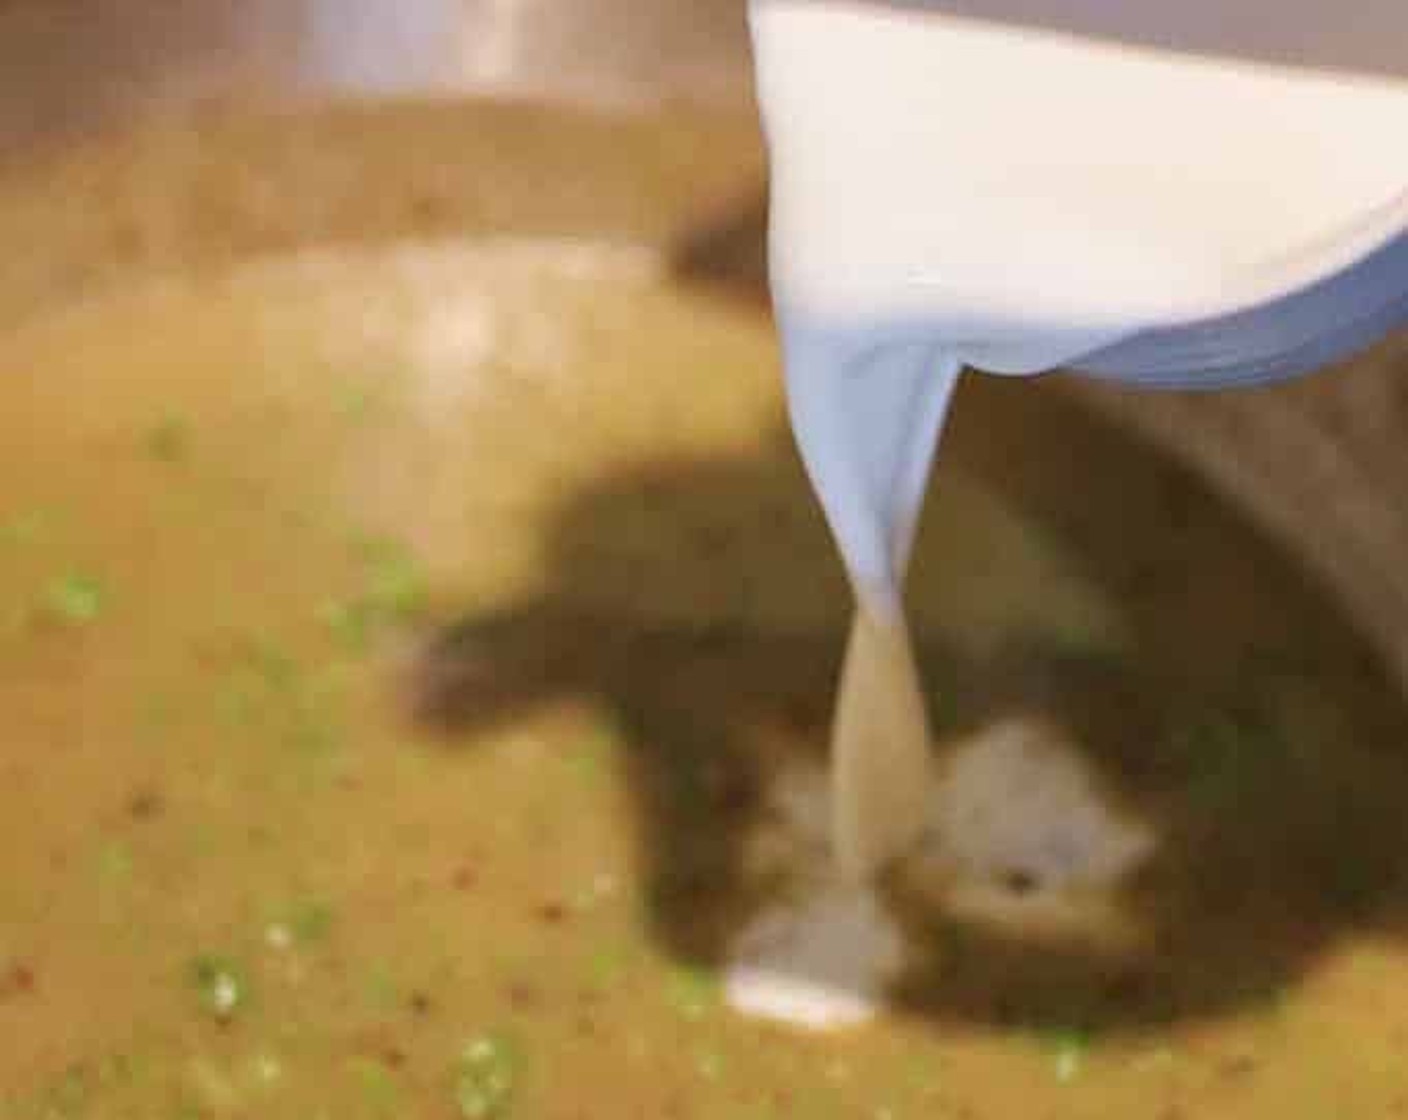 step 8 Slowly and gradually stir in the Chicken Broth (1 1/2 cups), whisking until smooth. Add the Heavy Cream (1/4 cup) and Ground Nutmeg (1/2 tsp). Whisk continuously until the sauce is reduced by 1/3, about 5 minutes.